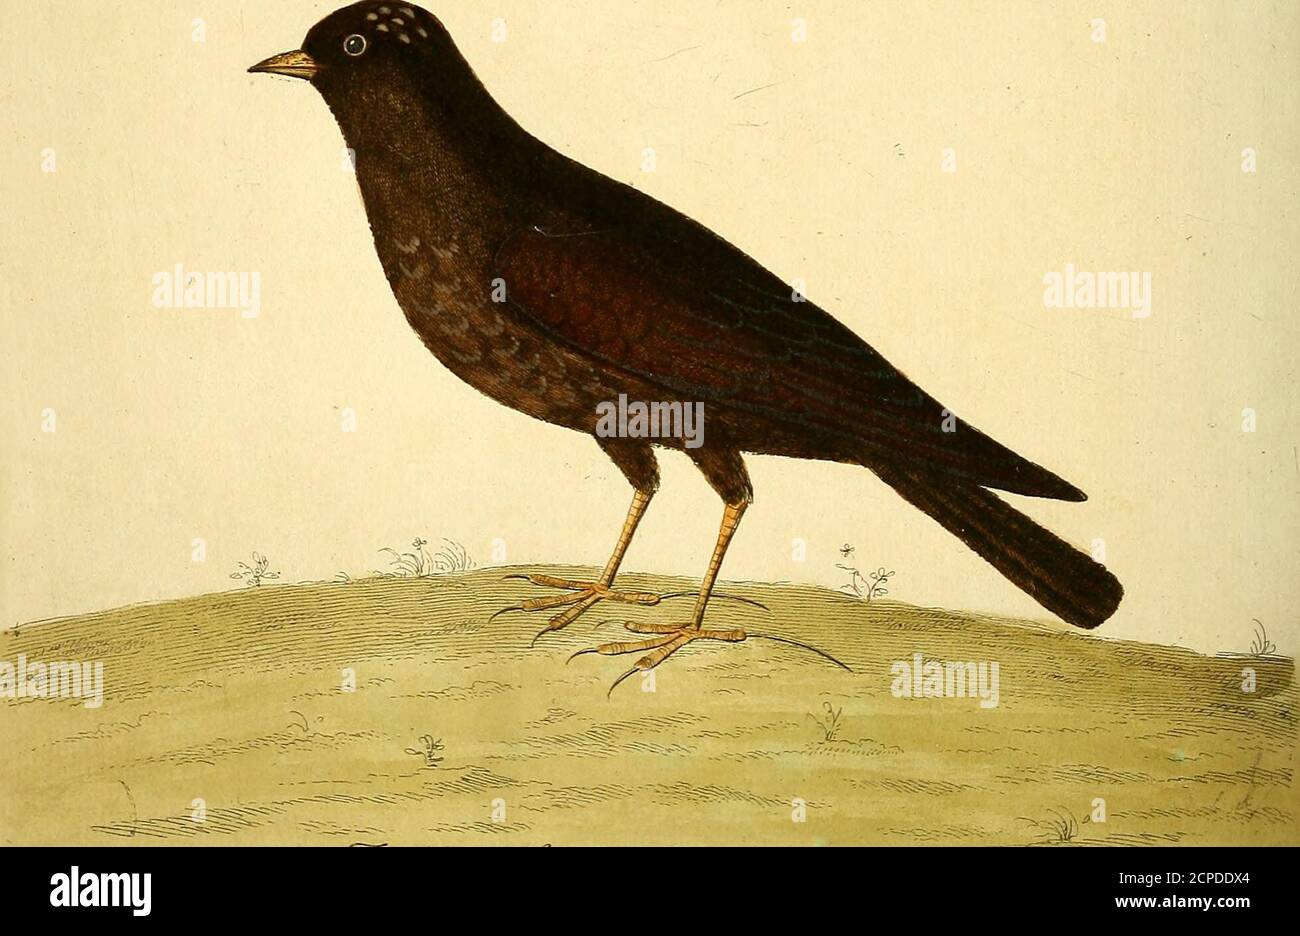 . A natural history of birds : illustrated with a hundred and one copper plates, curiously engraven from the life . IJA^^ J^Cartu/a-rve^ (^leazar.Mf^ti^^l J:f- ^ ^U- ^■. ^^/-/a^A ^a^ . /J. cl/A^^^.- jyj y. ( 47 )7he black Lark. Numb. LI. THE Bill of this Bird was of a duiky yellow; thelri-des of the Eyes yellowiih: It was all over of a darkreddifli brown, inclining to black, excepting the hindpart of the Head, on which was fome dufky yellowiih Fea-thers 5 likewife fome Feathers with whitiih Edges on theBelly. The Legs, Feet, and Claws were of a dirty yellow.This Lark was taken with a Clap Net Stock Photo